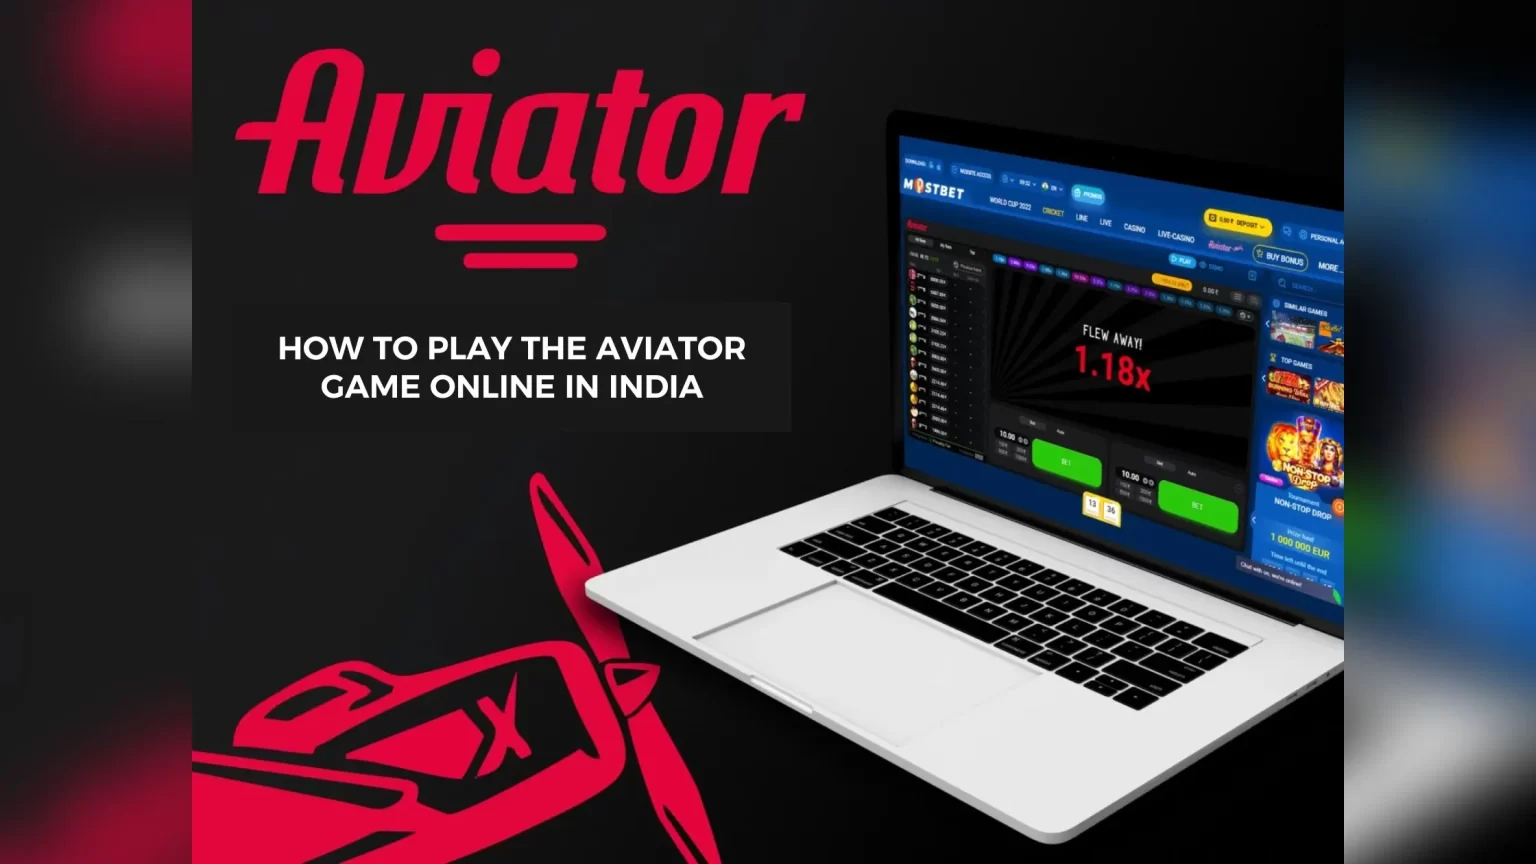 Play Aviator 1xBet Online: How to Play Aviator Game for Money